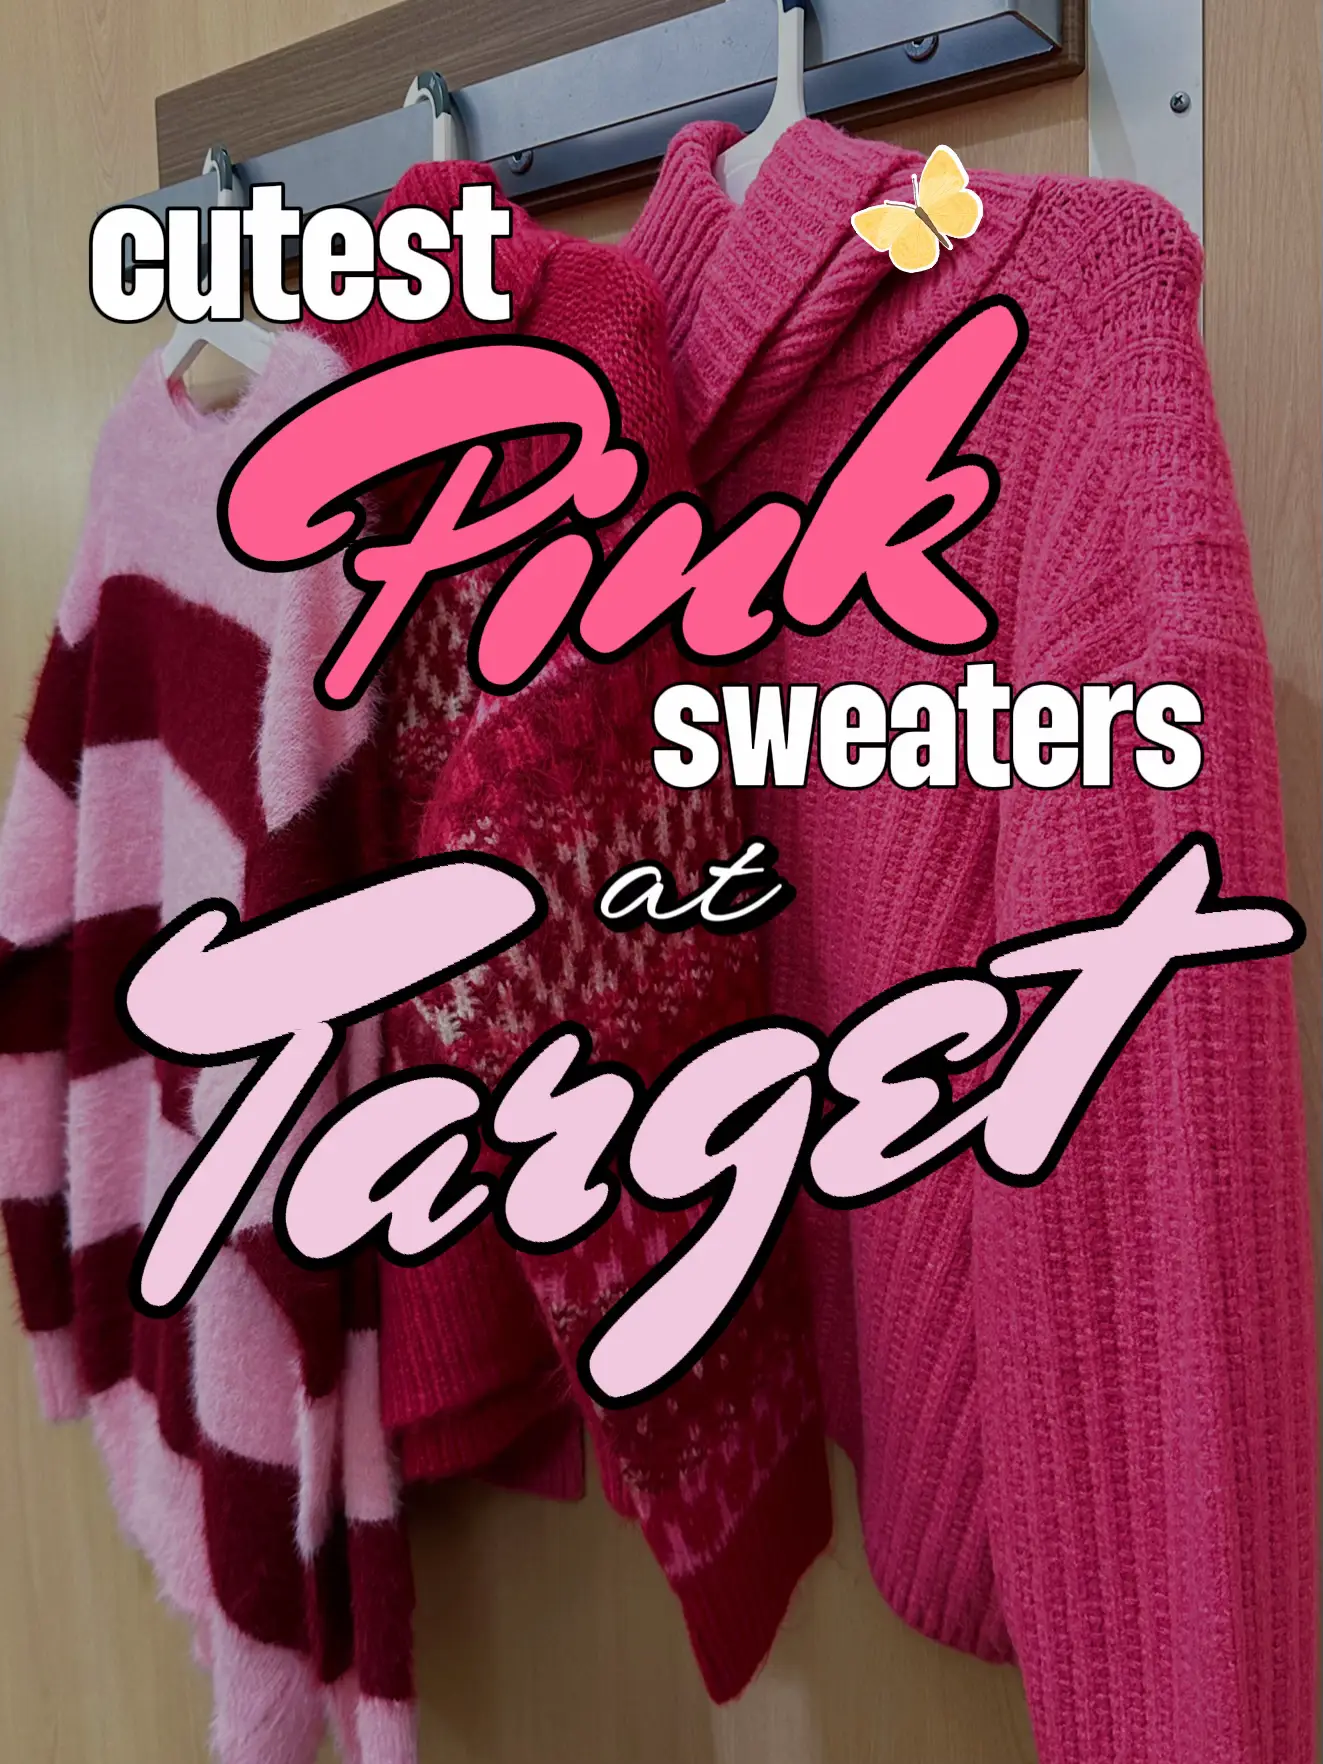  A rack of pink and white sweaters.